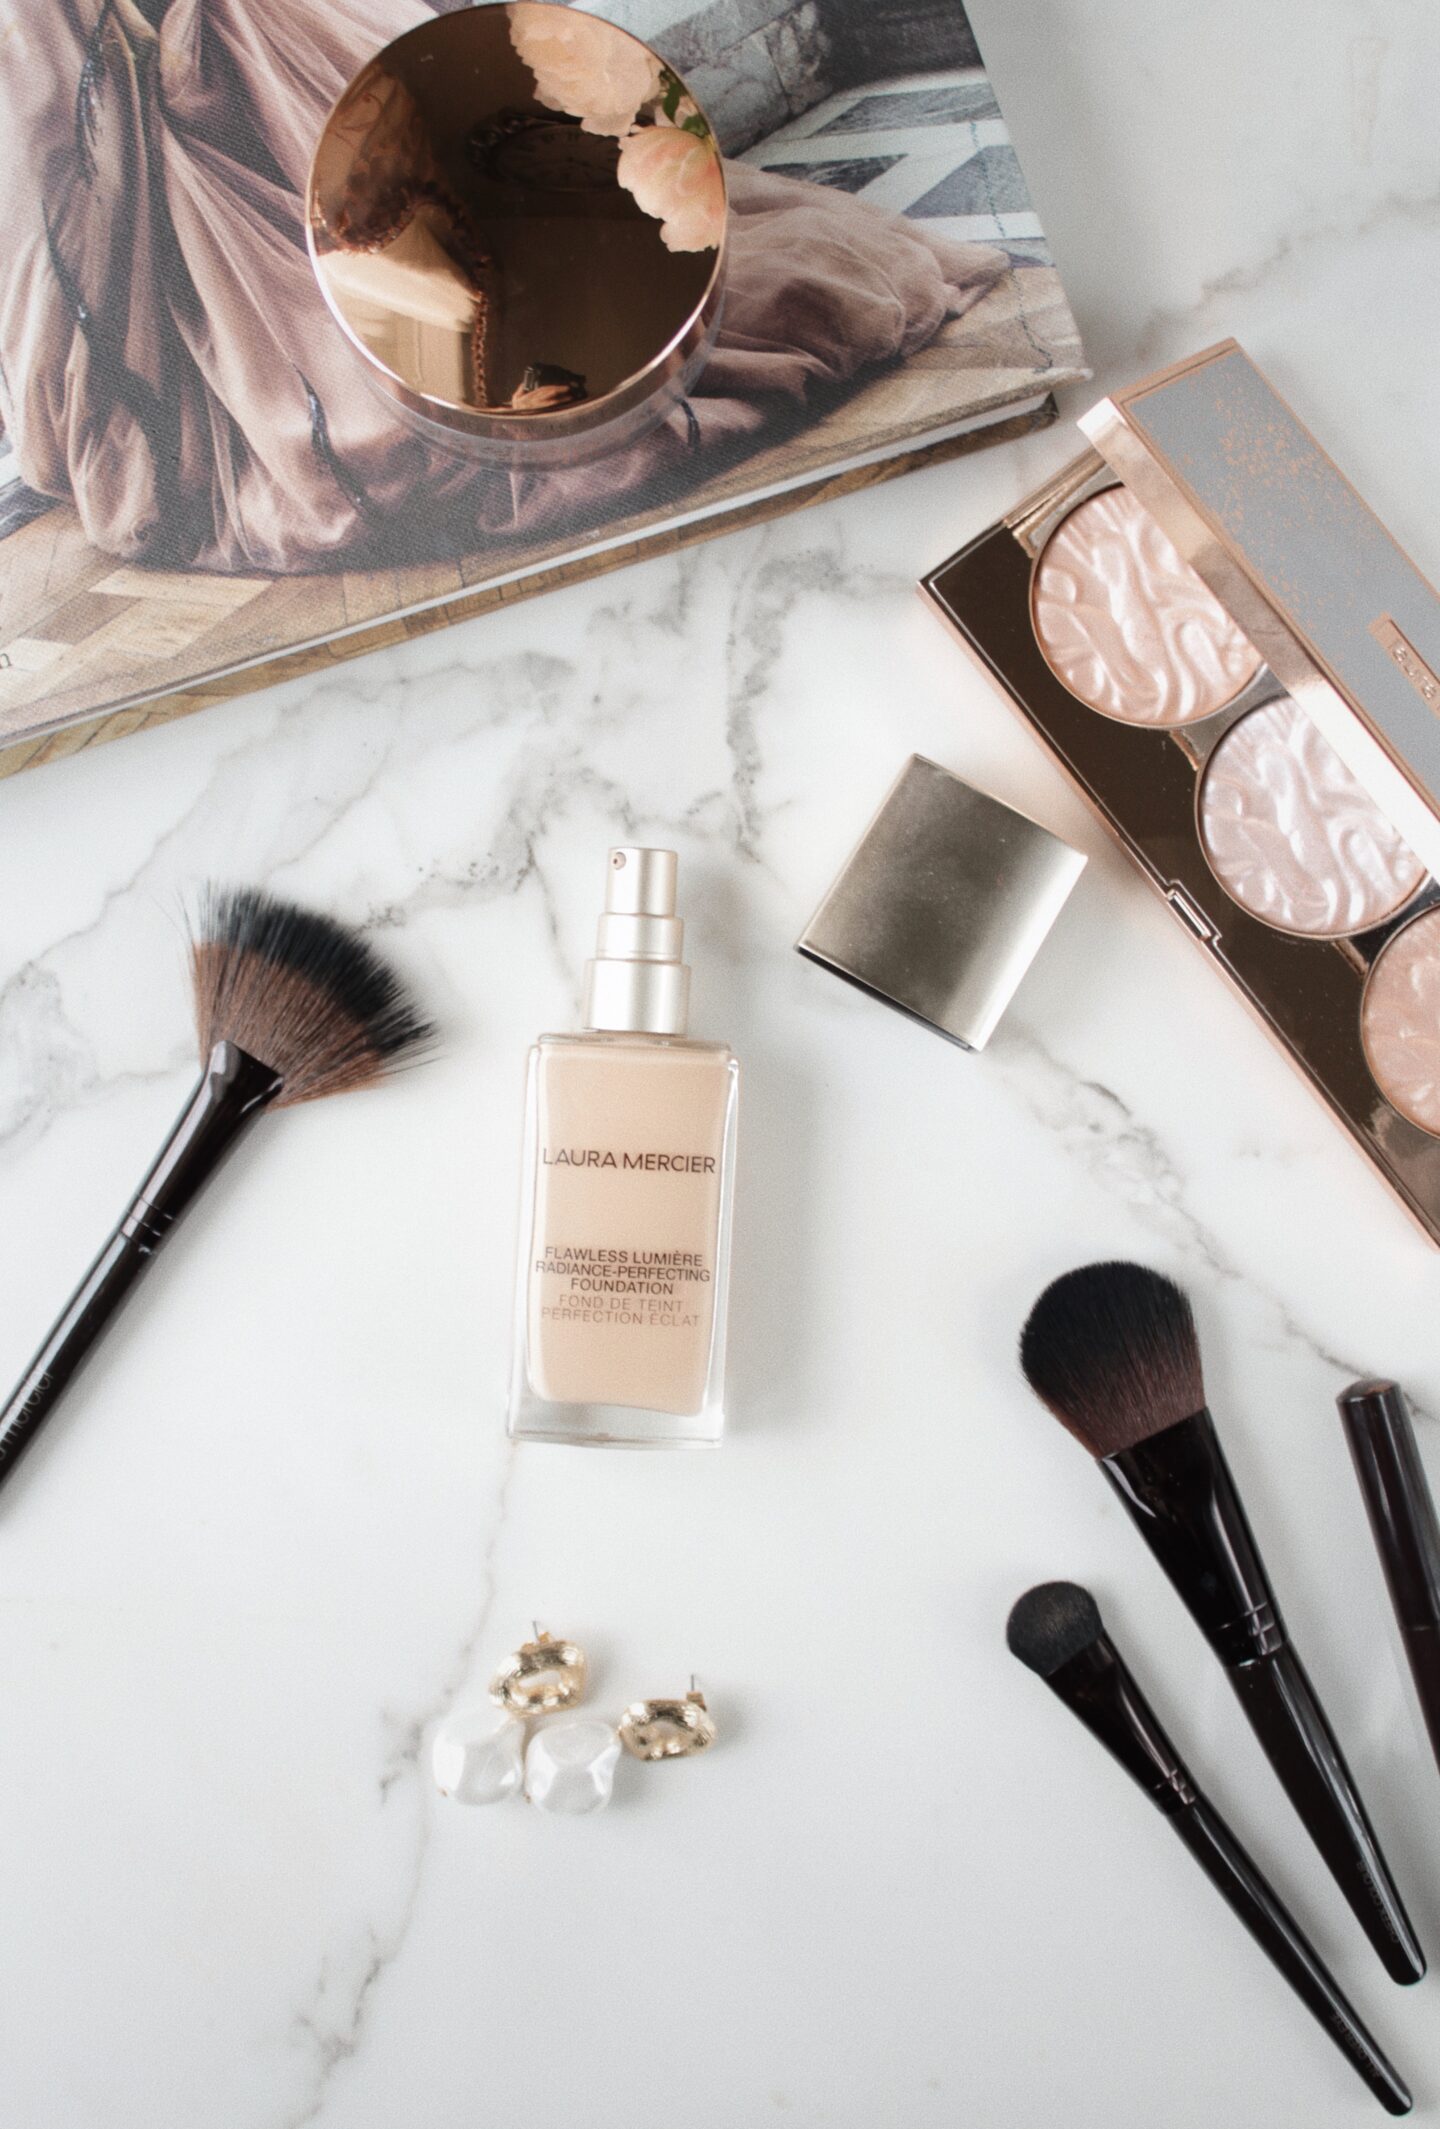 Laura Mercier | Flawless Lumière Radiance-Perfecting Foundation